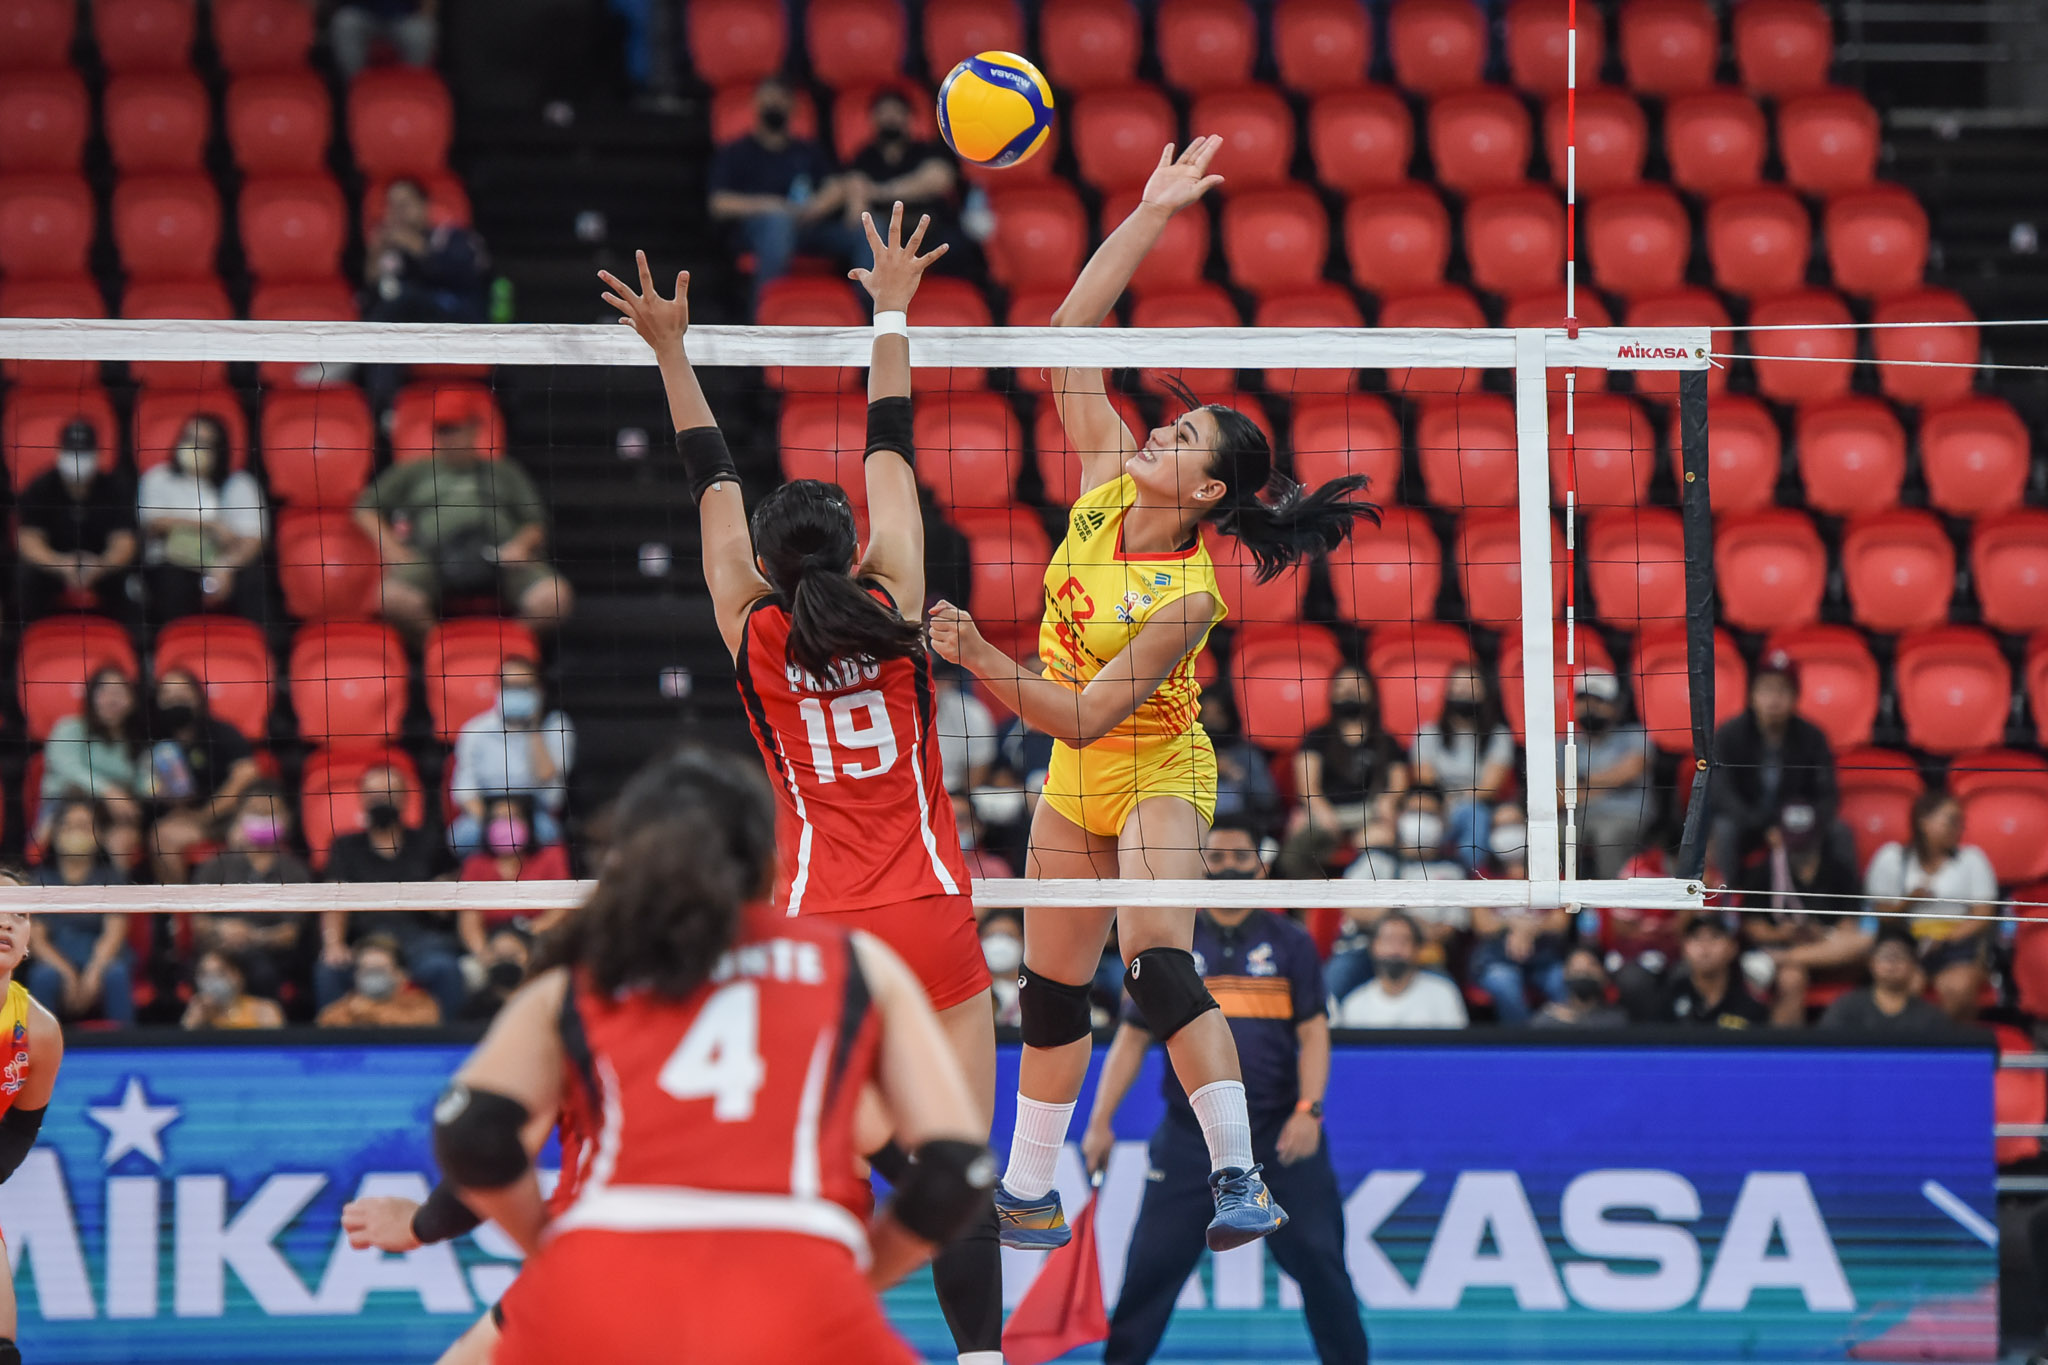 PVL-2023-PLDT-vs.-F2-Myla-Pablo-0176 Myla Pablo looks to be one of F2's leaders despite being the team's new girl News PVL Volleyball  - philippine sports news